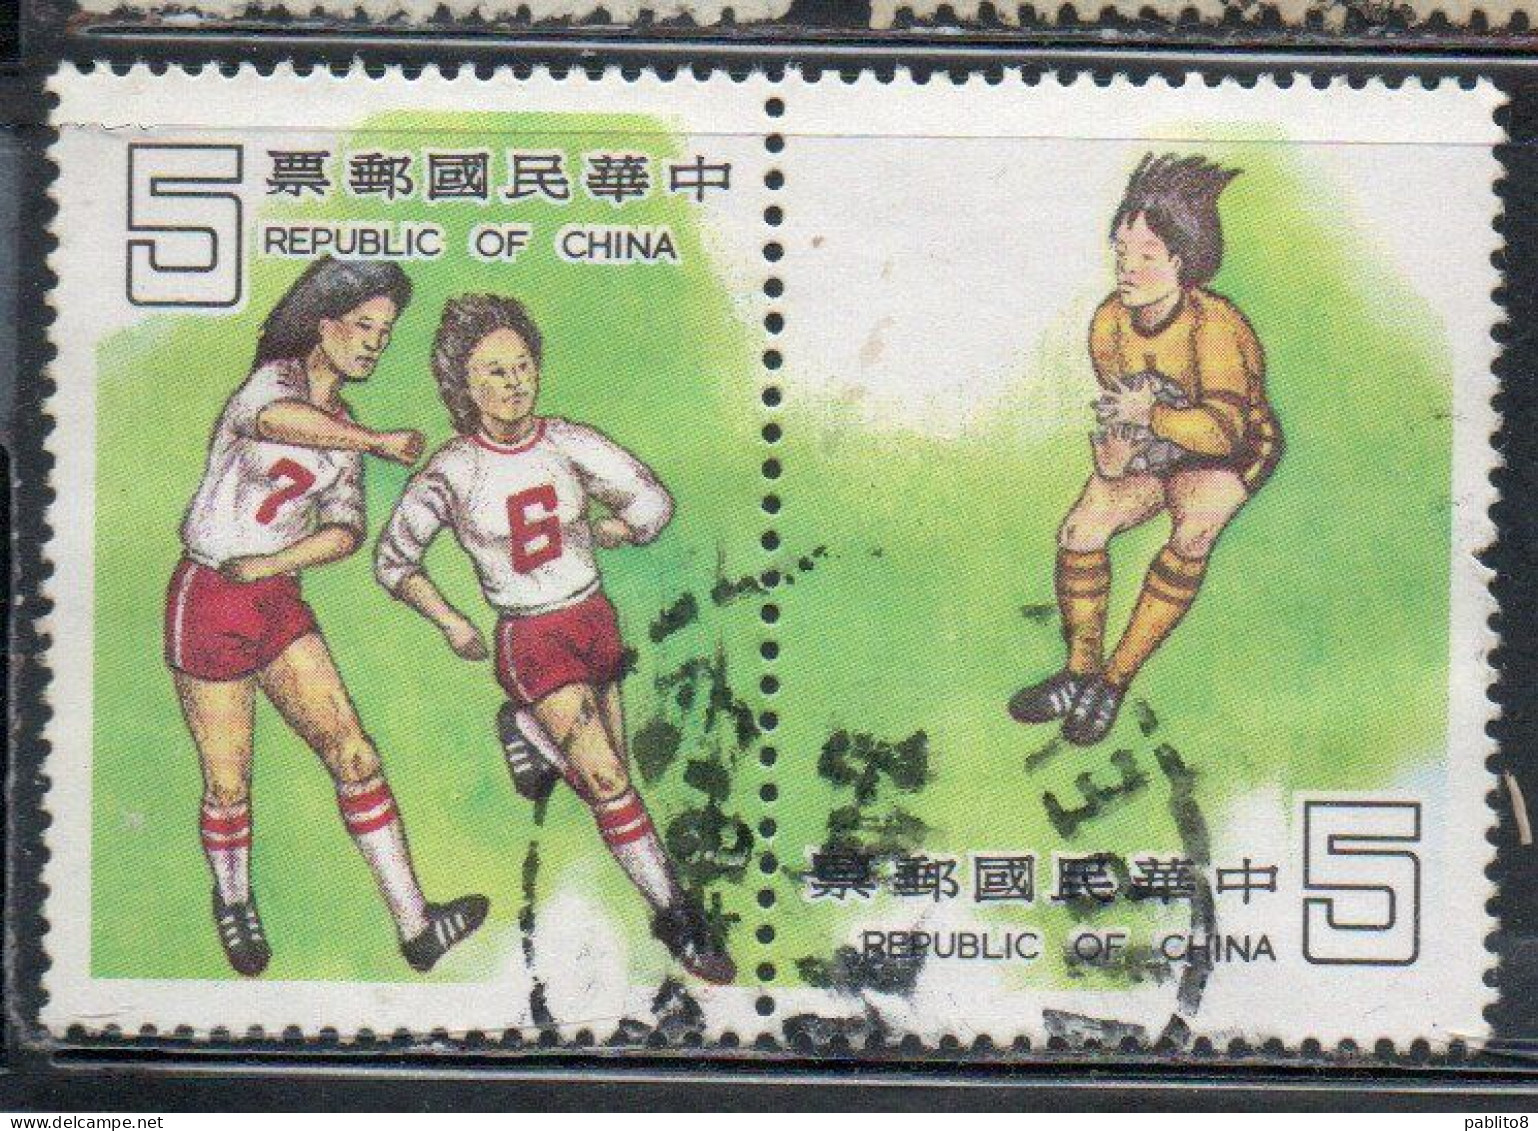 CHINA REPUBLIC CINA TAIWAN FORMOSA 1981 SPORTS DAY SOCCER PLAYERS PAIR SET SERIE 5+5$ USED USATO OBLITERE' - Gebraucht